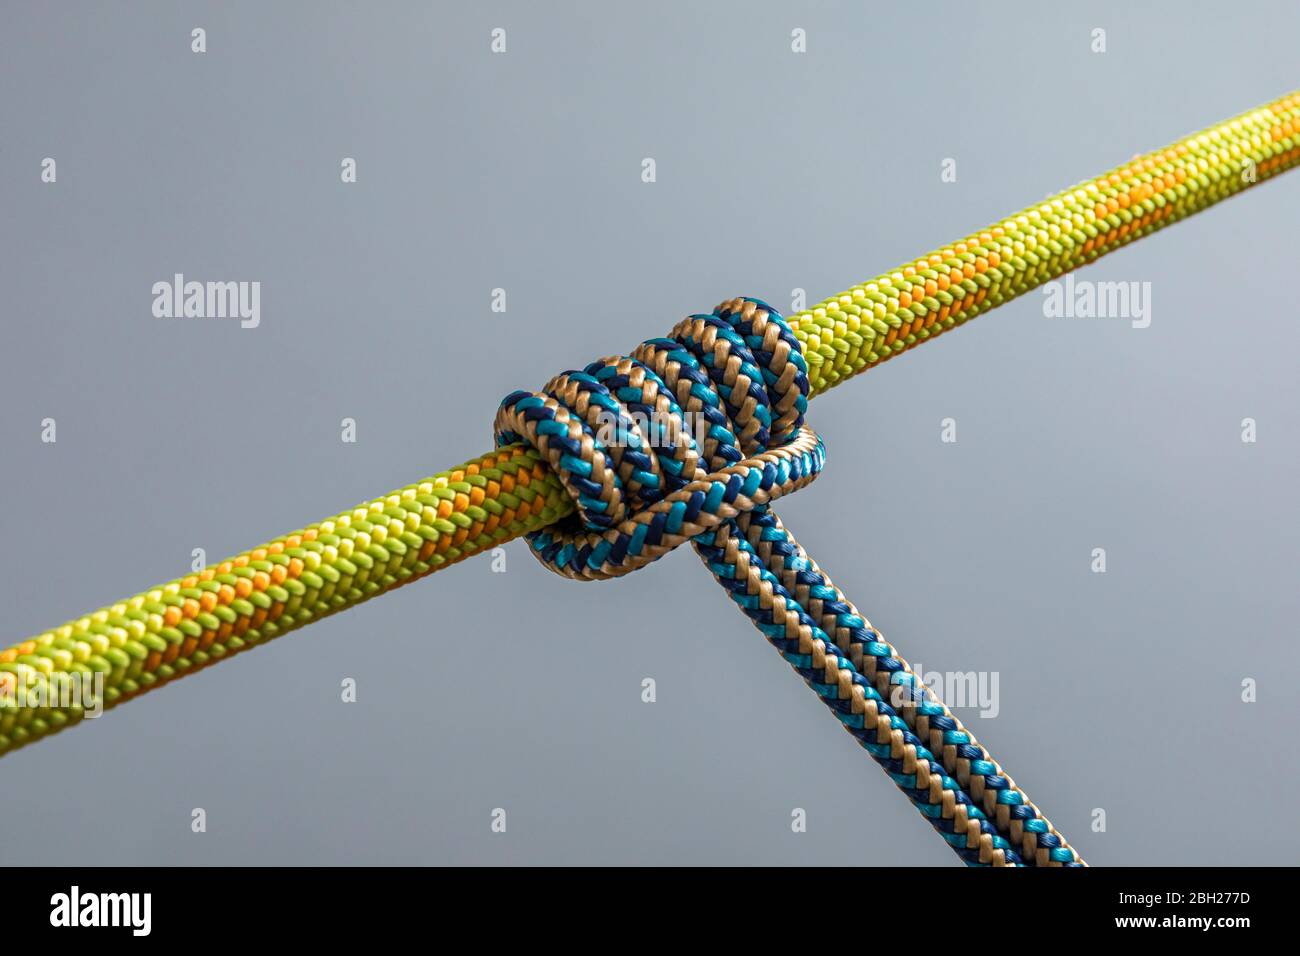 Prusik knot on climbing rope Stock Photo